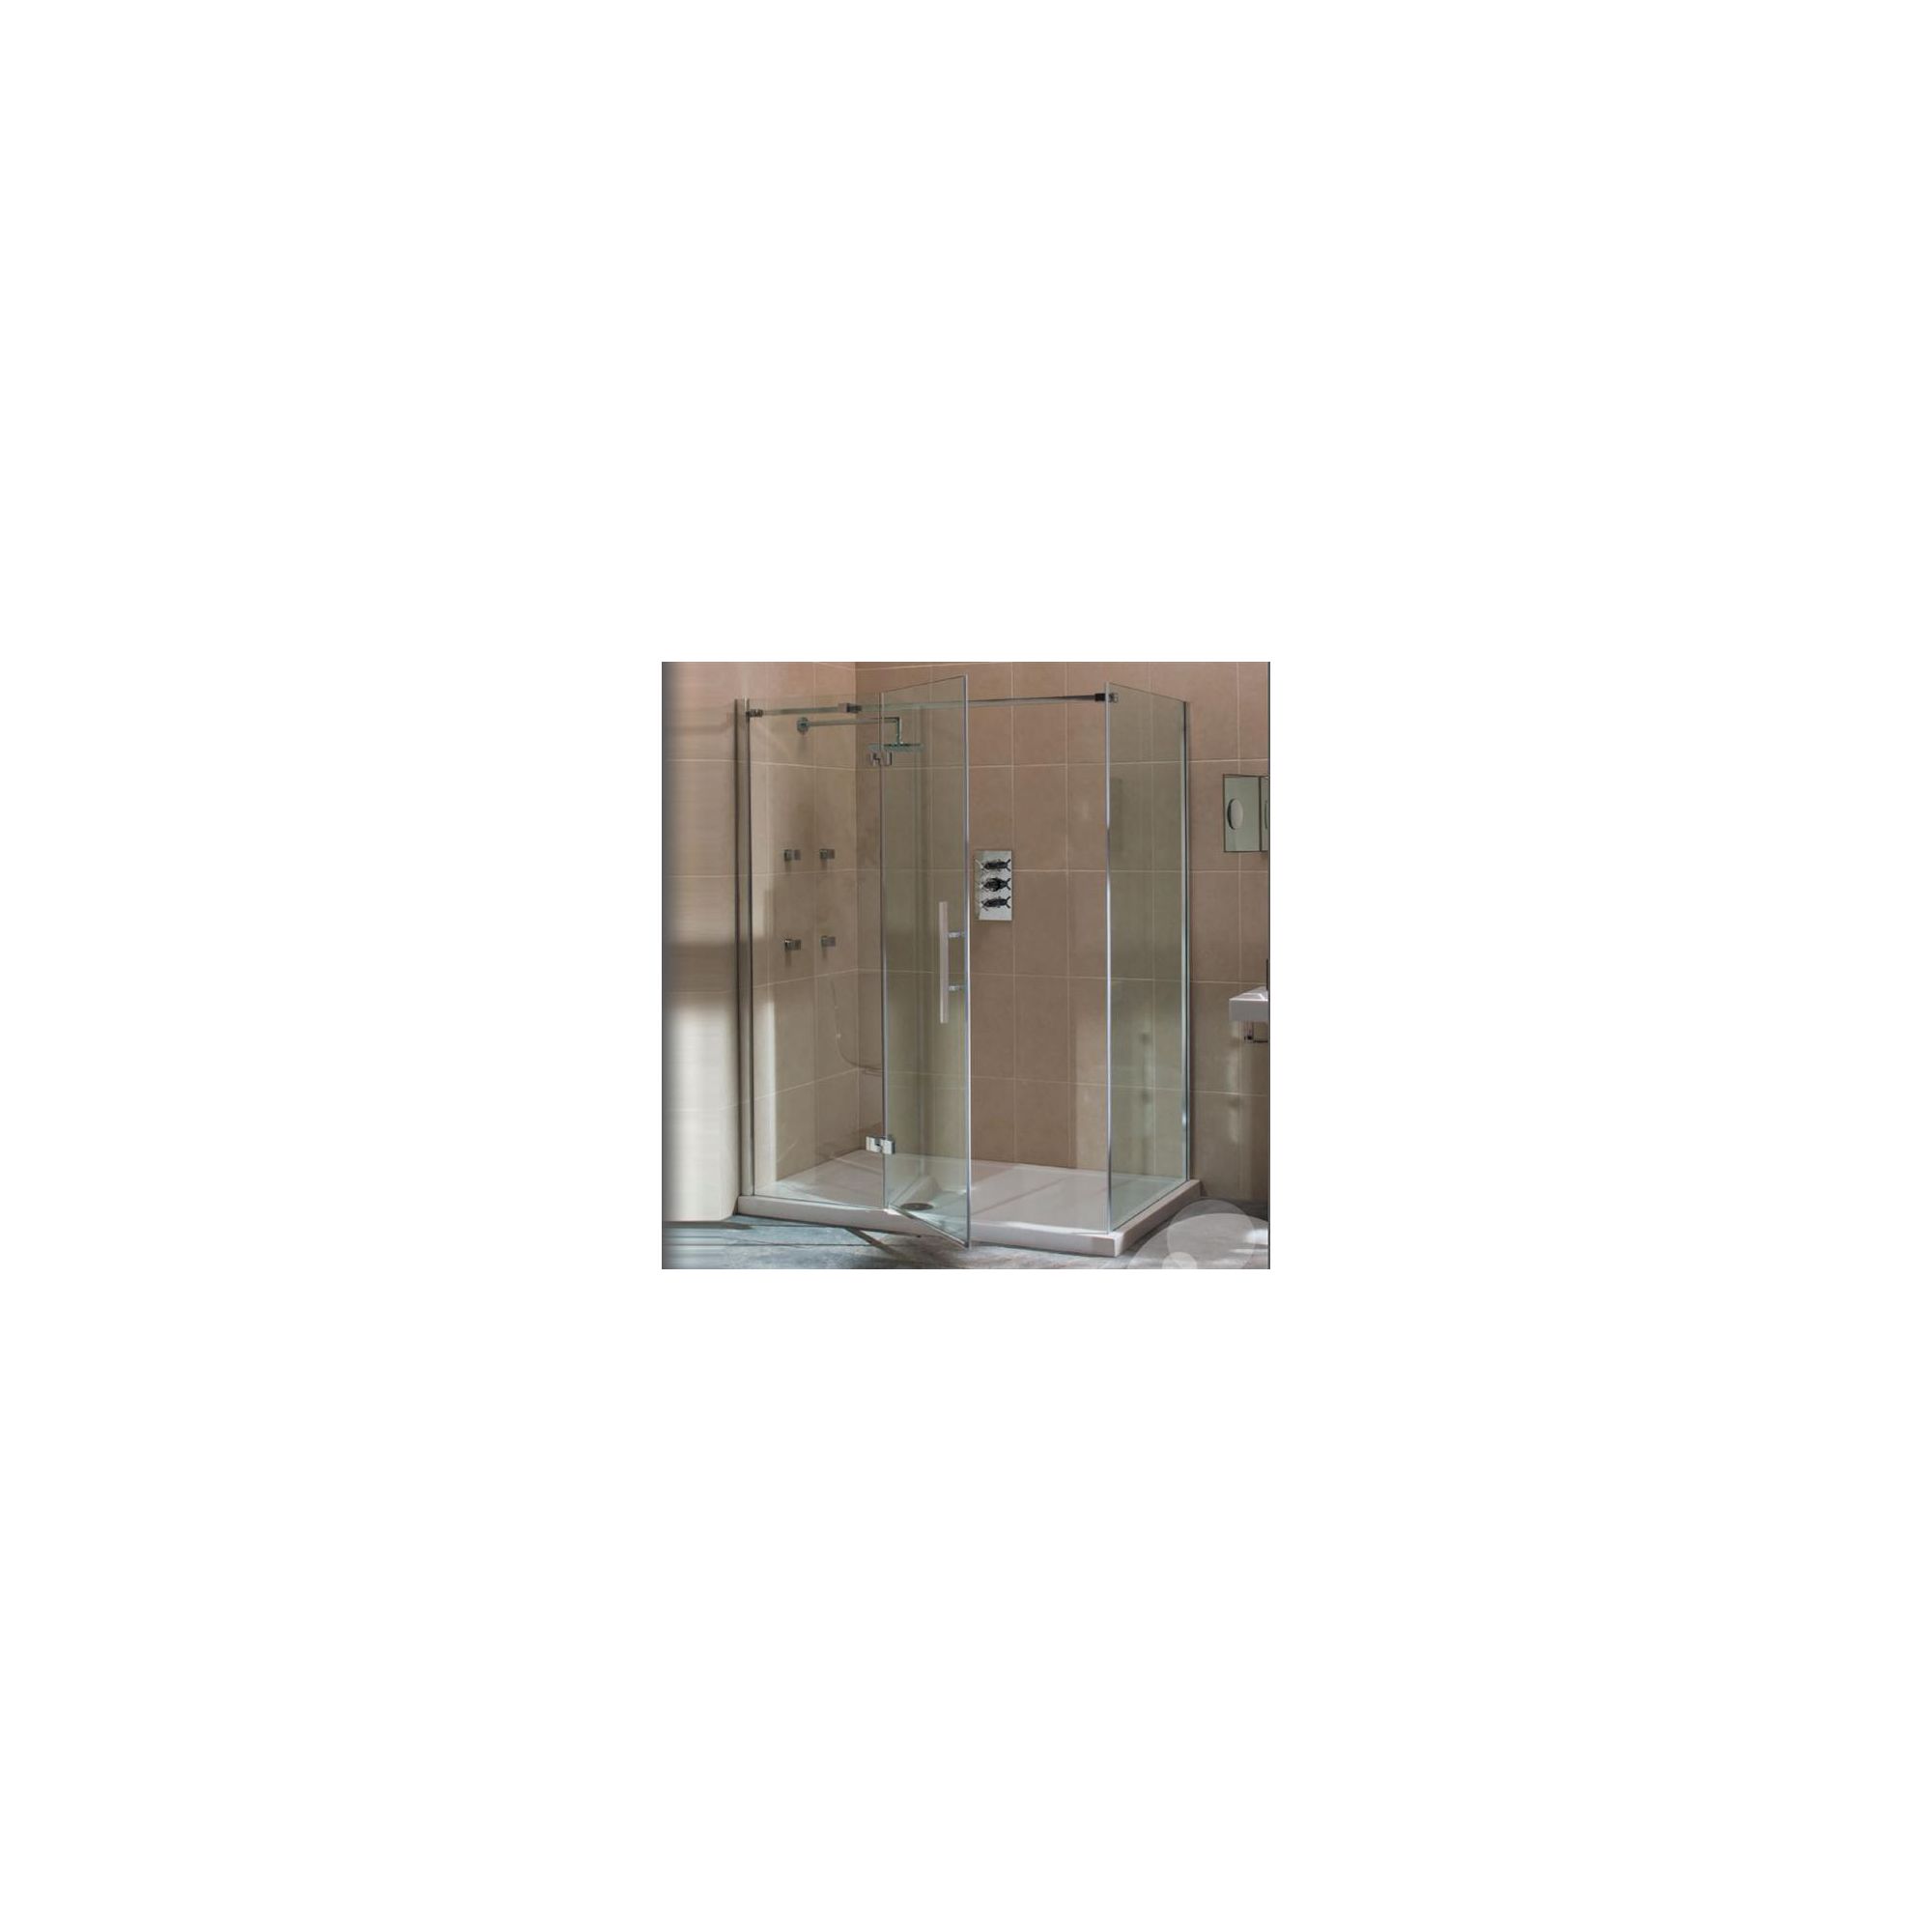 Merlyn Vivid Nine Hinged Door Shower Enclosure with Inline Panel, 1200mm x 900mm, Left Handed, Low Profile Tray, 8mm Glass at Tesco Direct